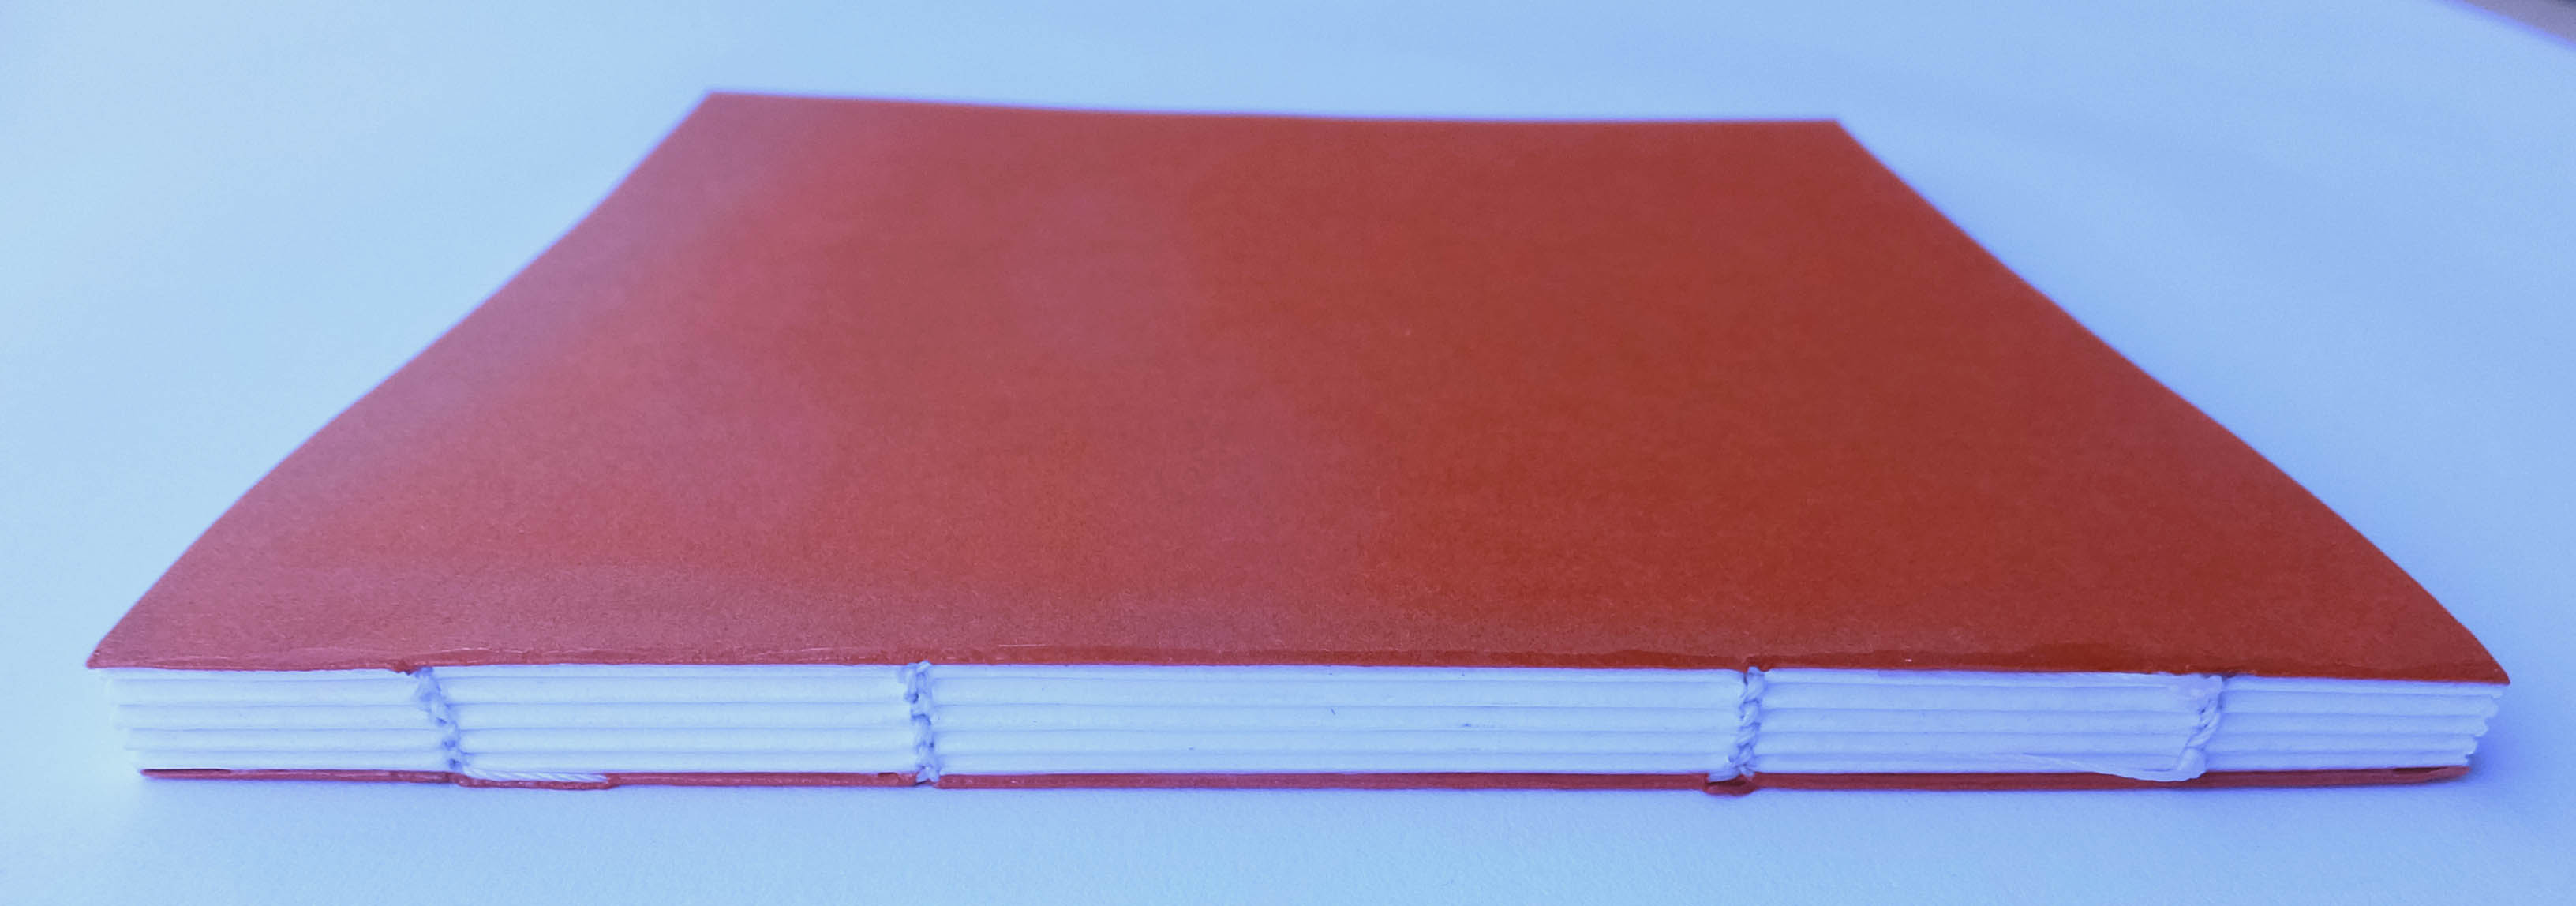 Square journal with coloured card cover